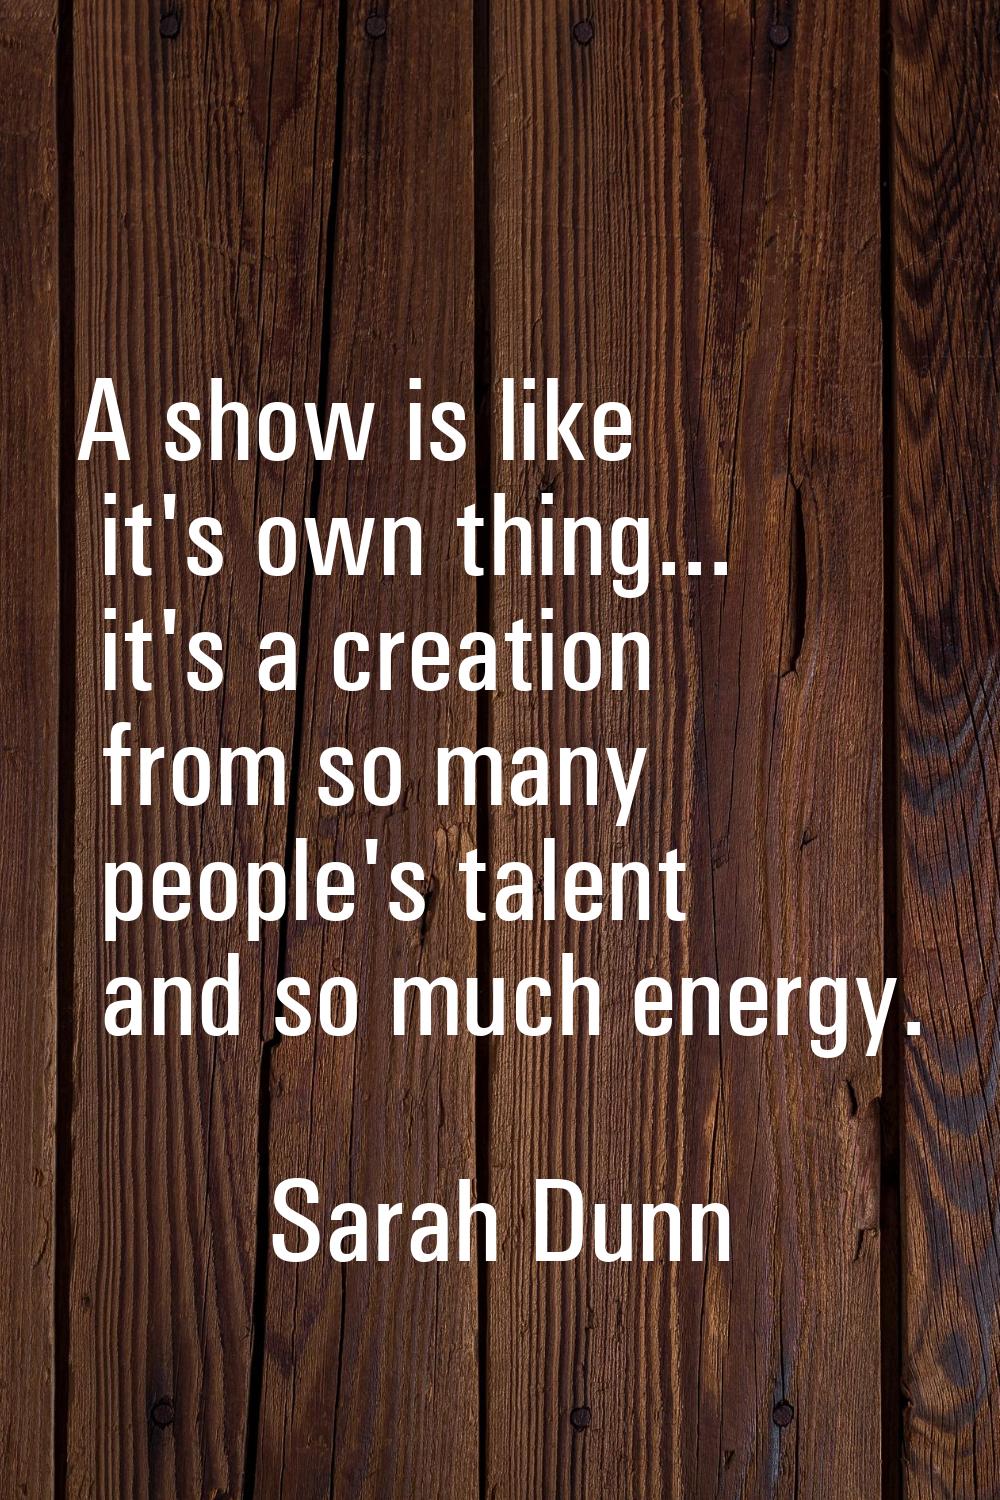 A show is like it's own thing... it's a creation from so many people's talent and so much energy.